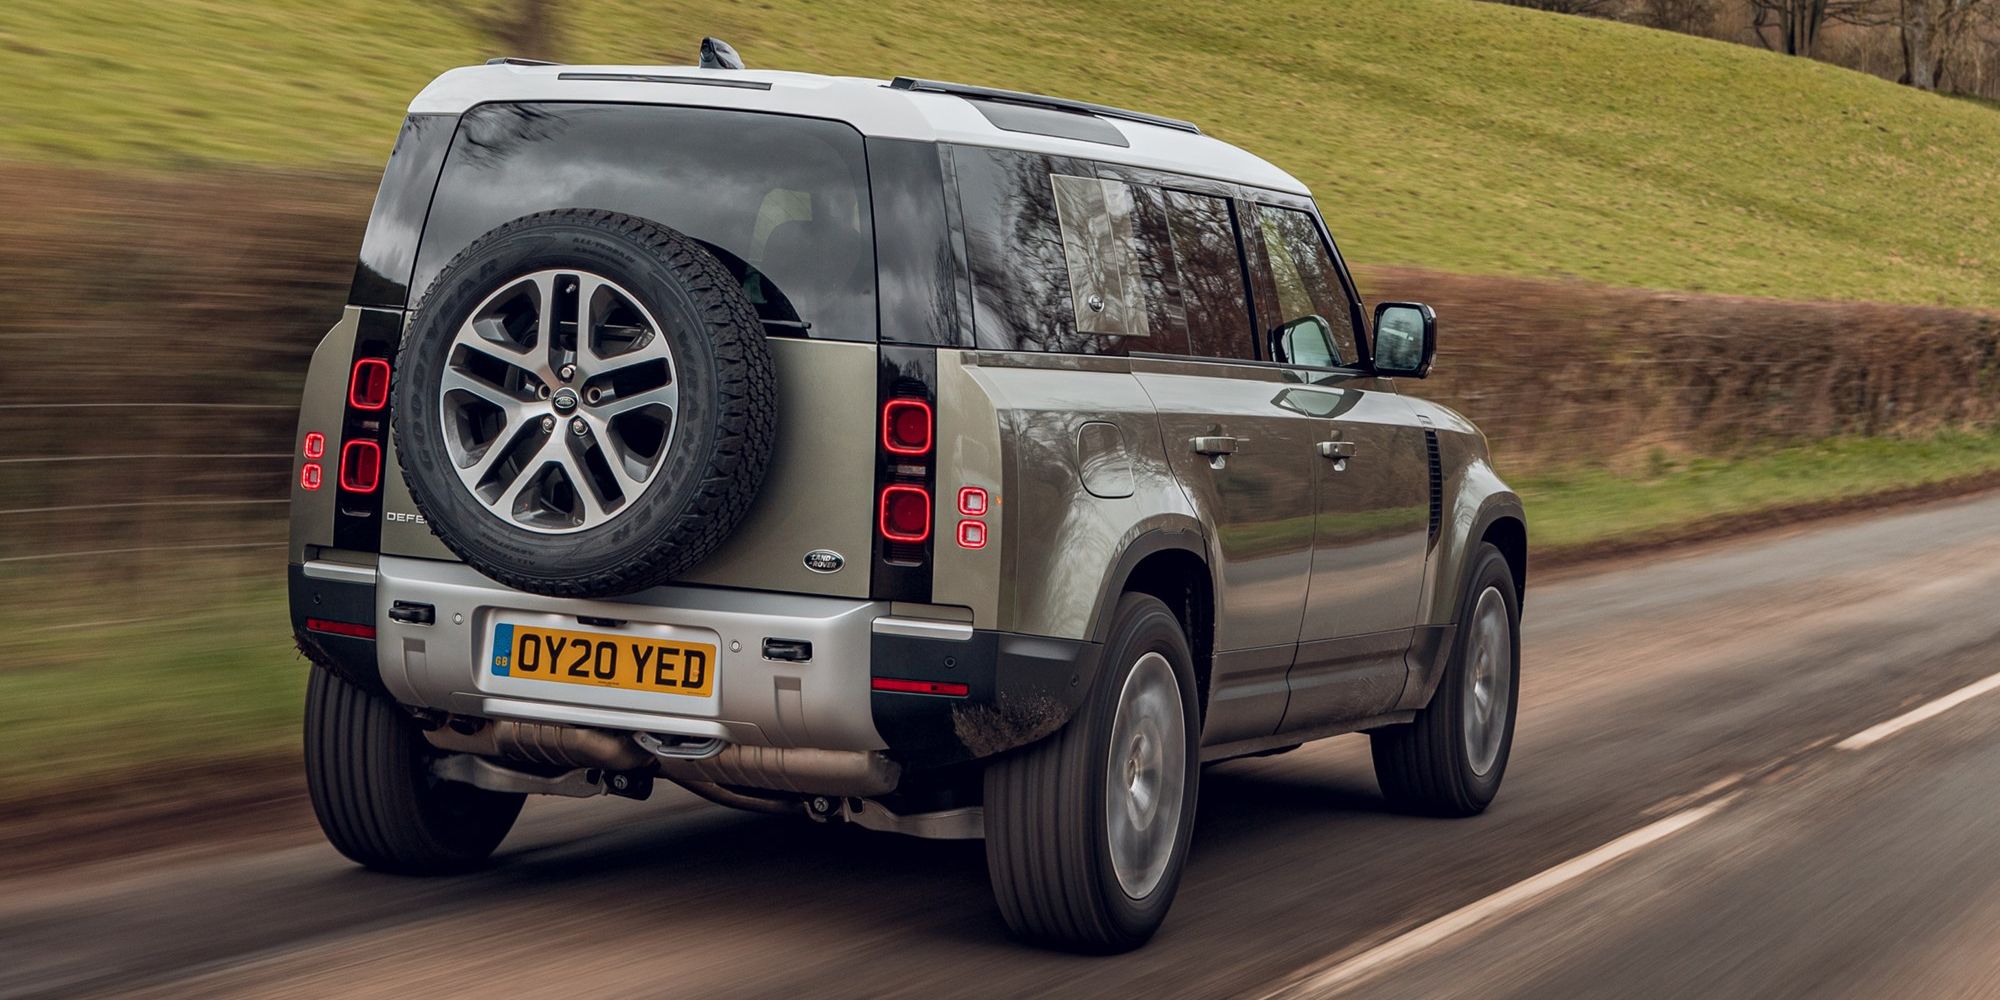 The rear of the new Defender